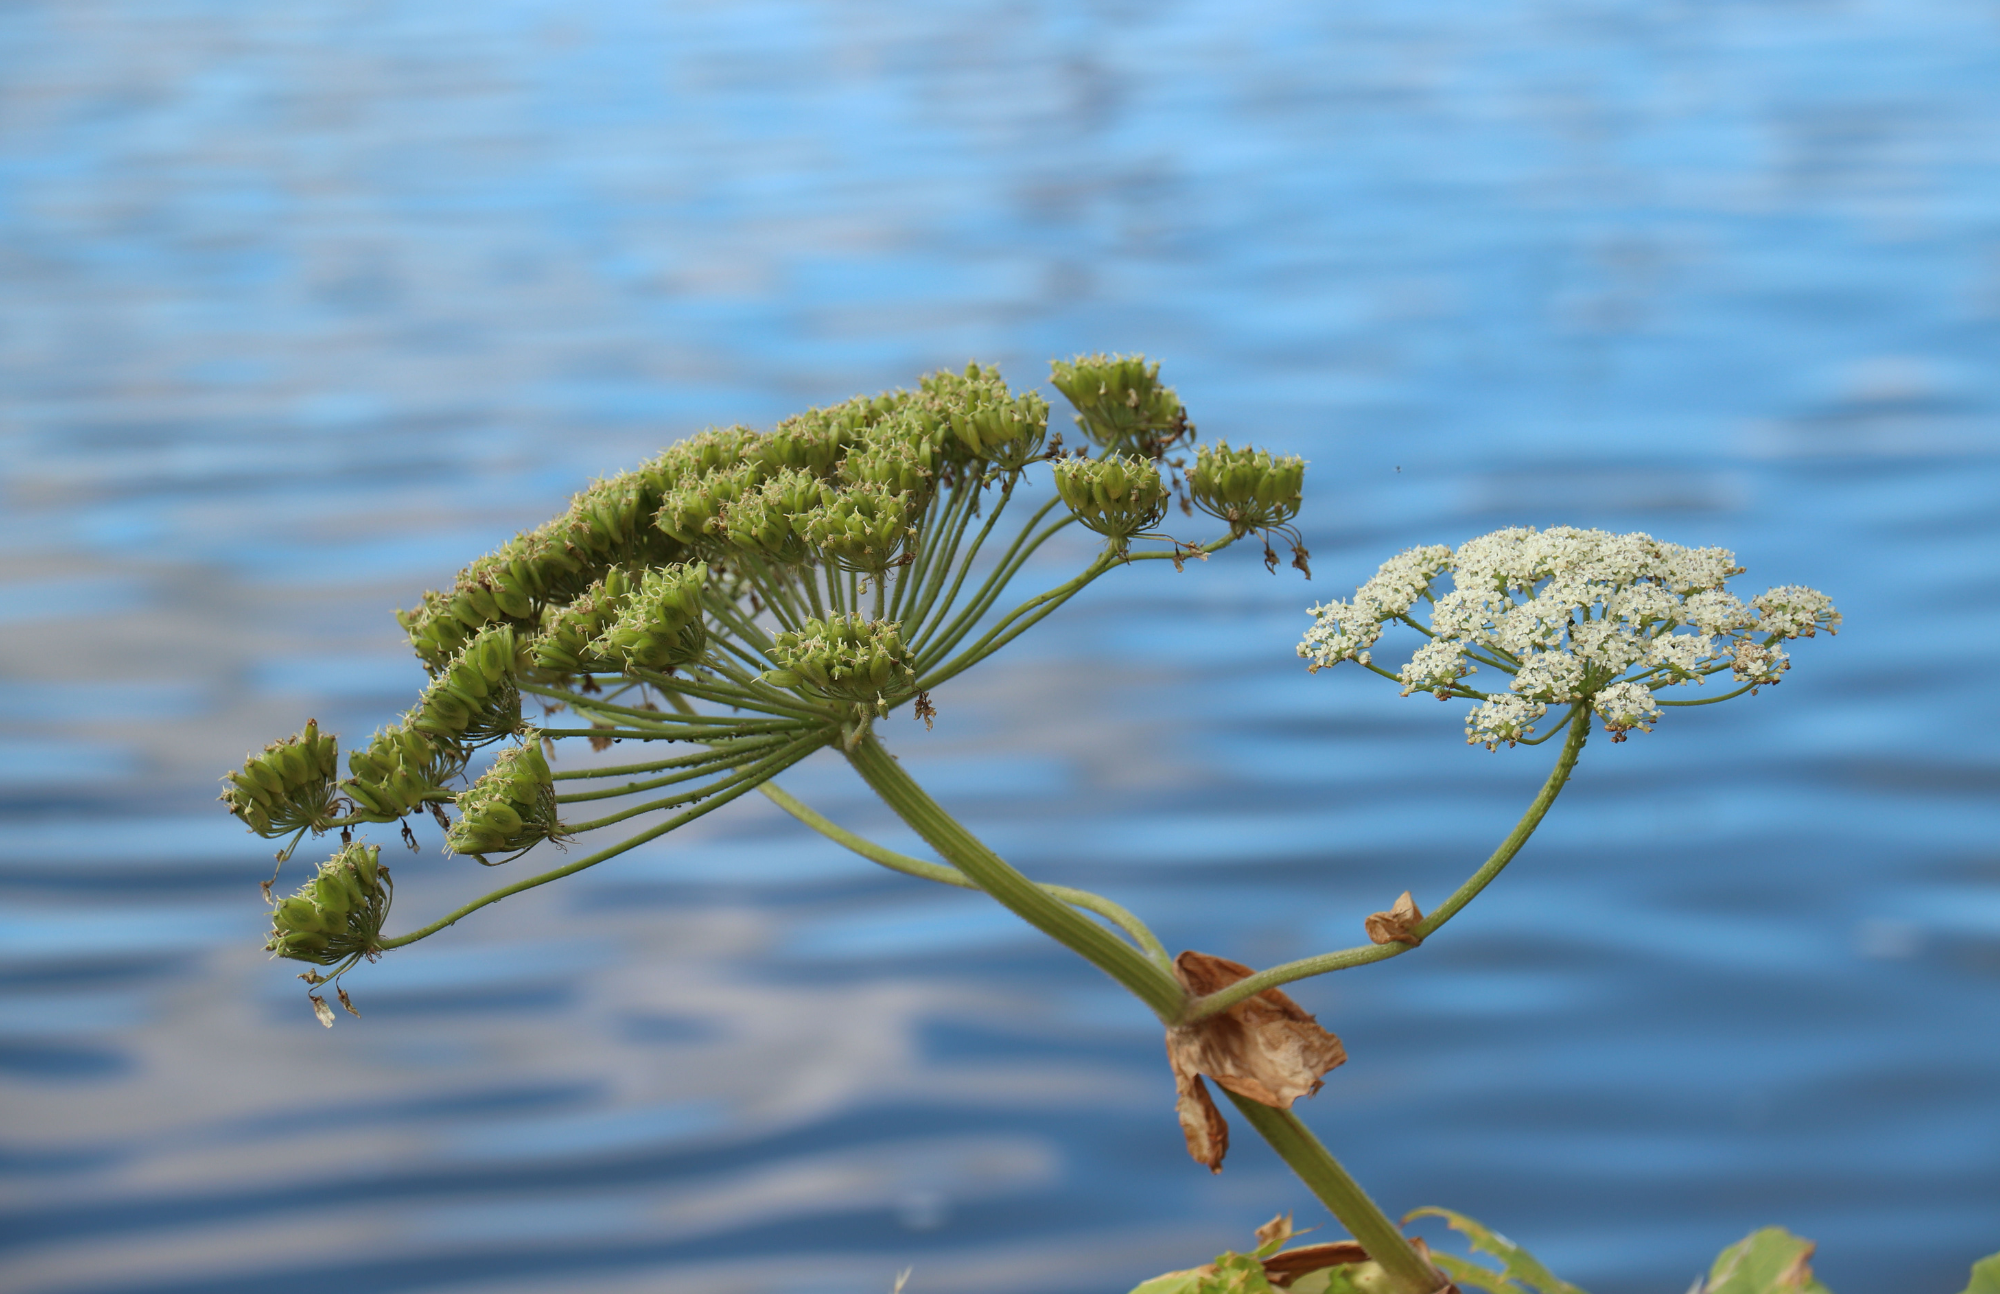 A photo of giant hogweed, an invasive plant, with water in the background.